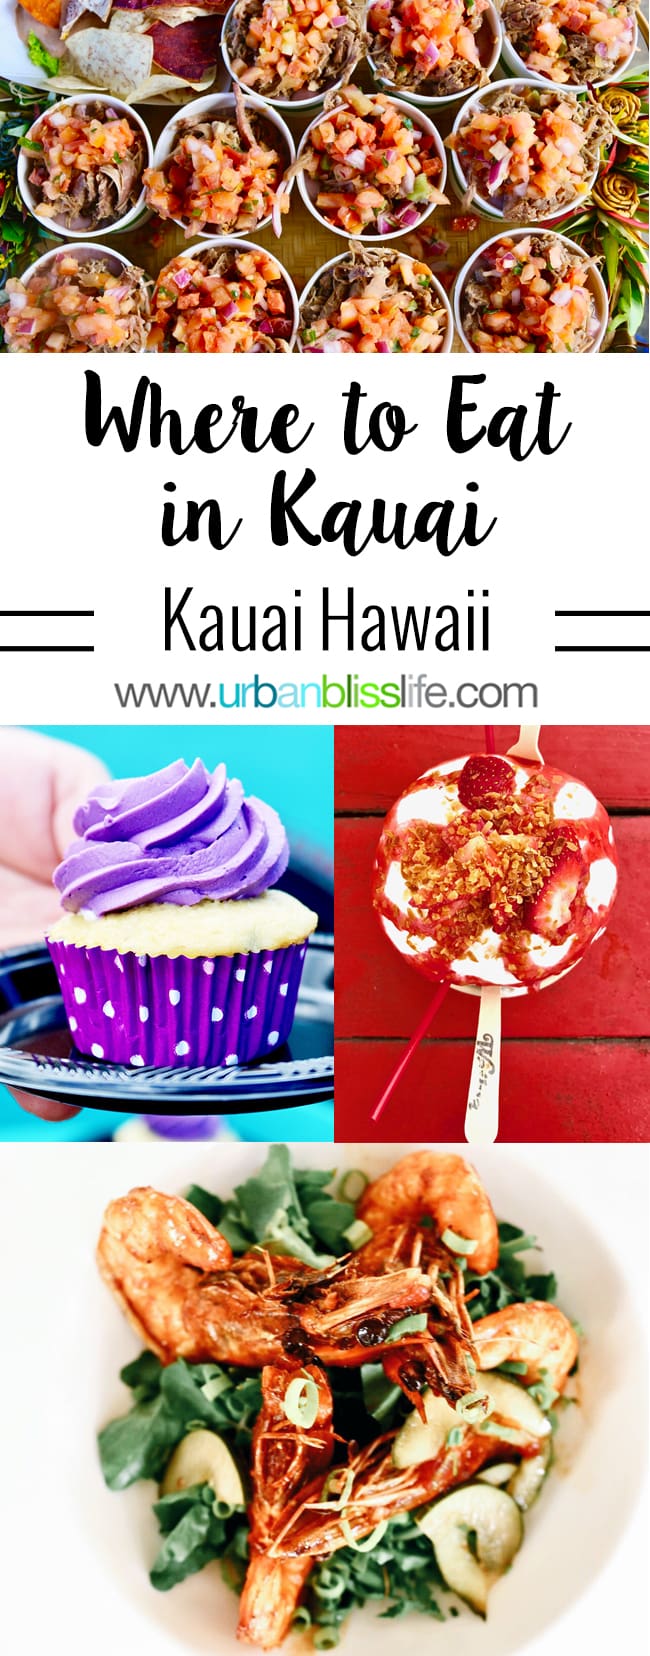 Where to Eat in Kauai: restaurant review on UrbanBlissLife.com